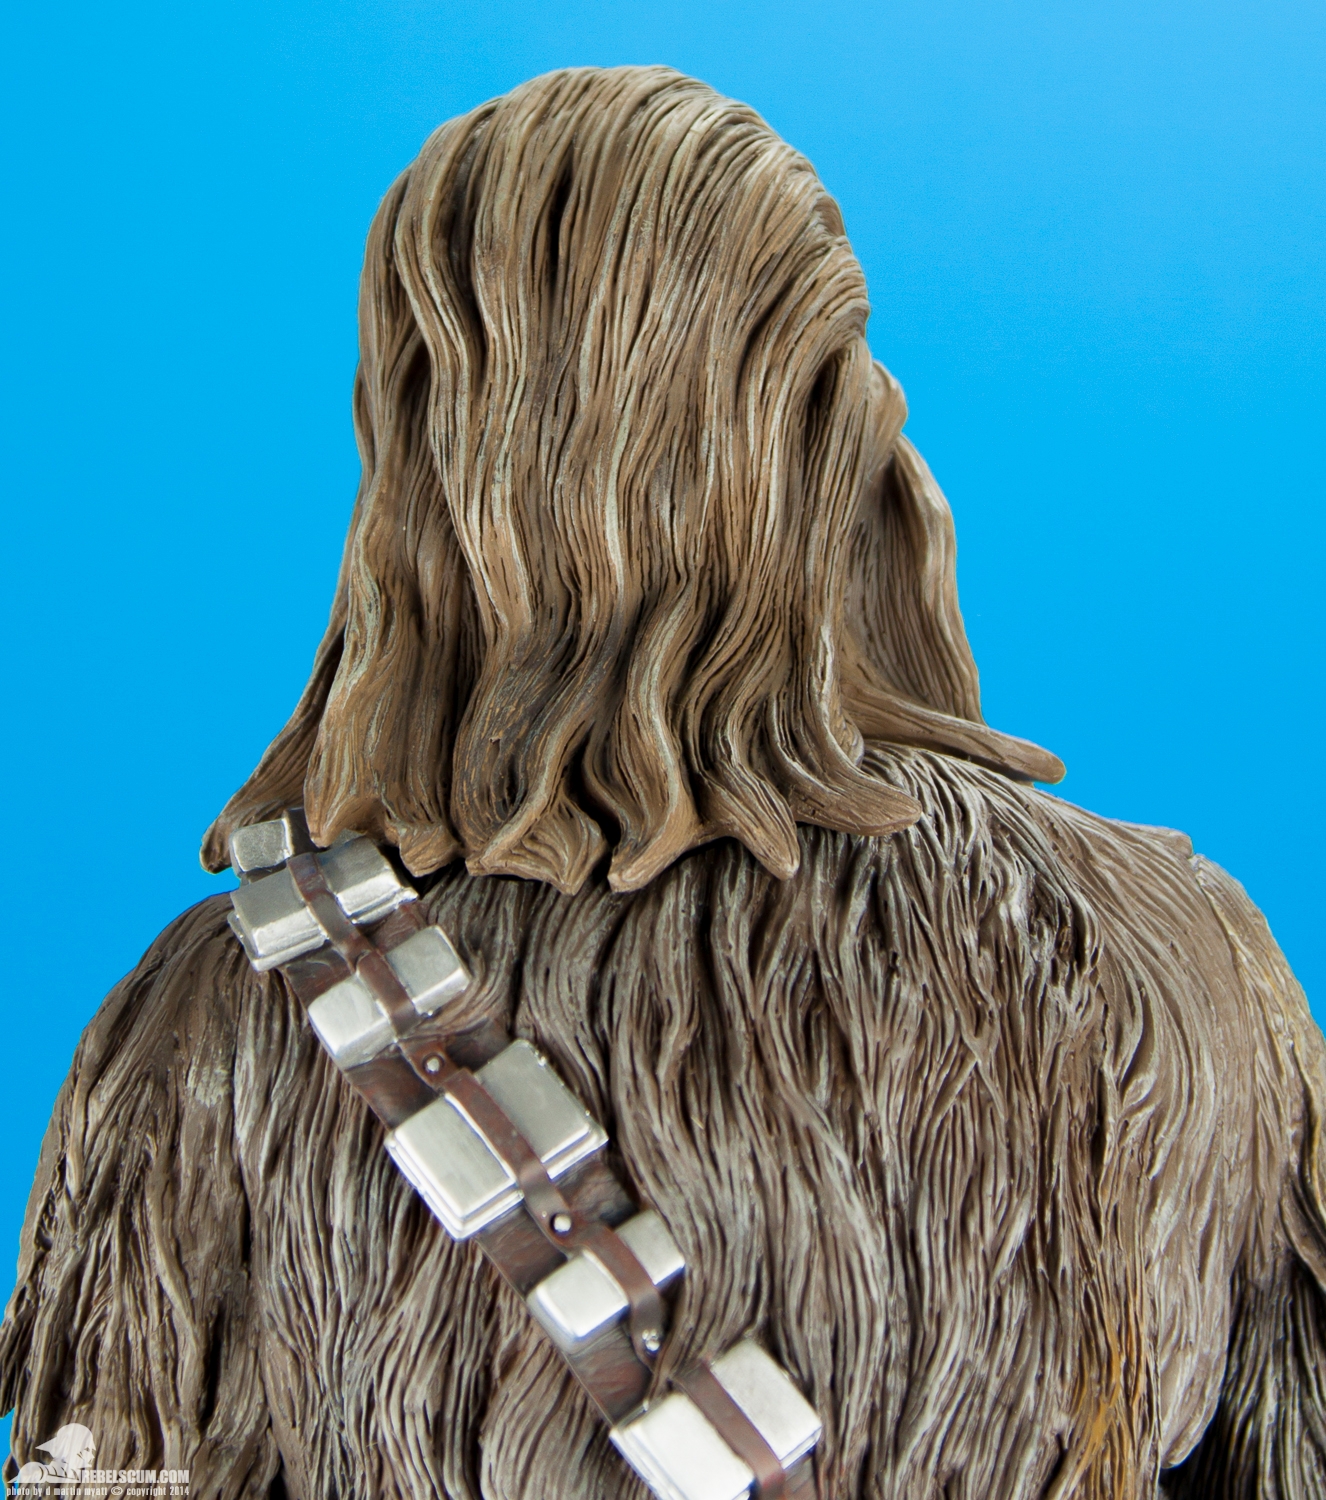 Chewbacca-Premium-Format-Figure-Sideshow-Collectibles-Exclusive-012.jpg